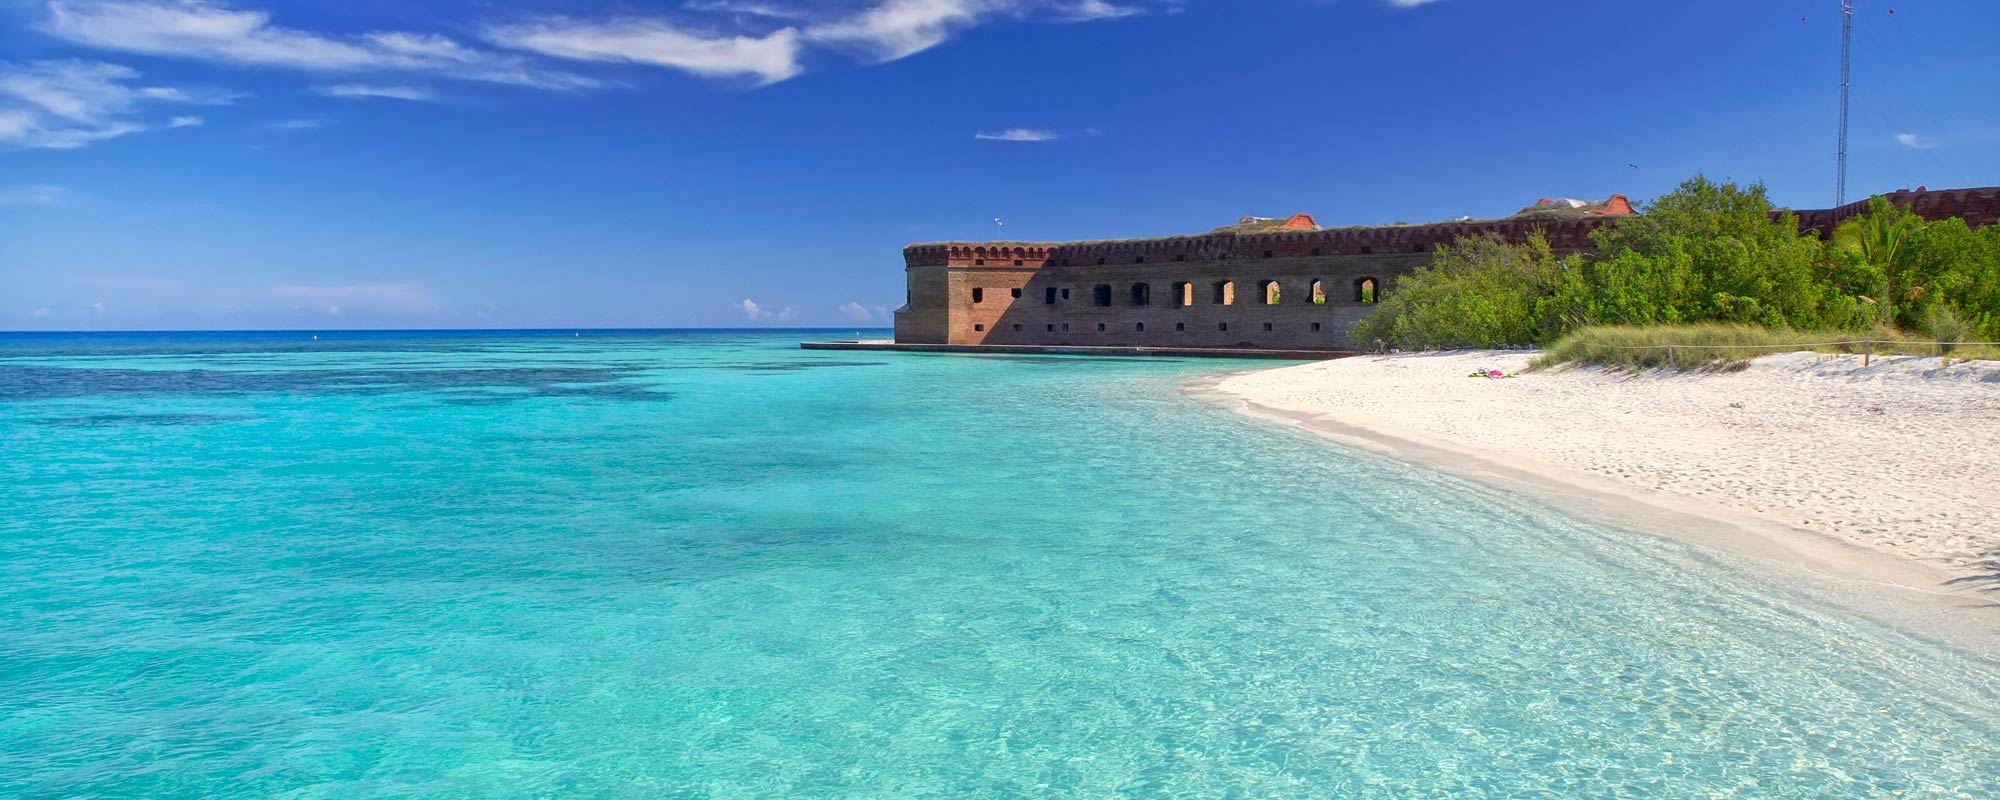 Pristine waters of Gulf of Mexico at Fort Jefferson